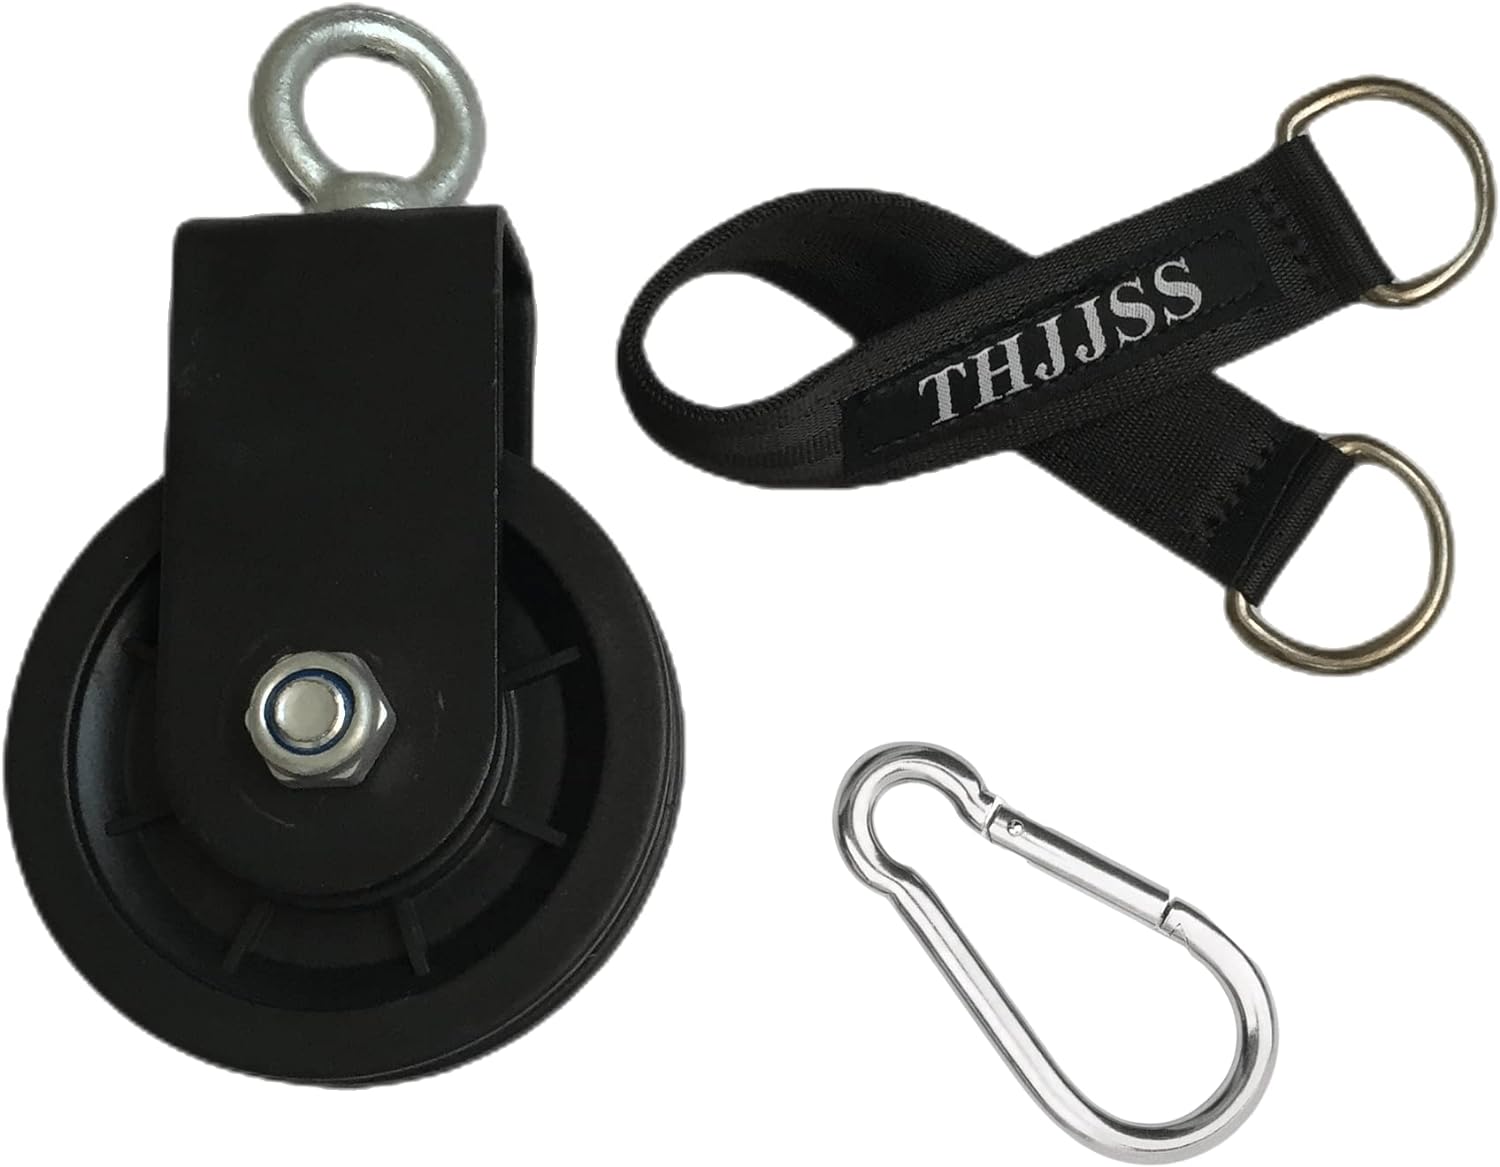 THJJSS Weight Cable Pulley System Gym,Pulley Wheel 360 Degree Rotating 3.54in Silent Pulley,Pulley Hanging Strap Carabiner Hooks Hammo